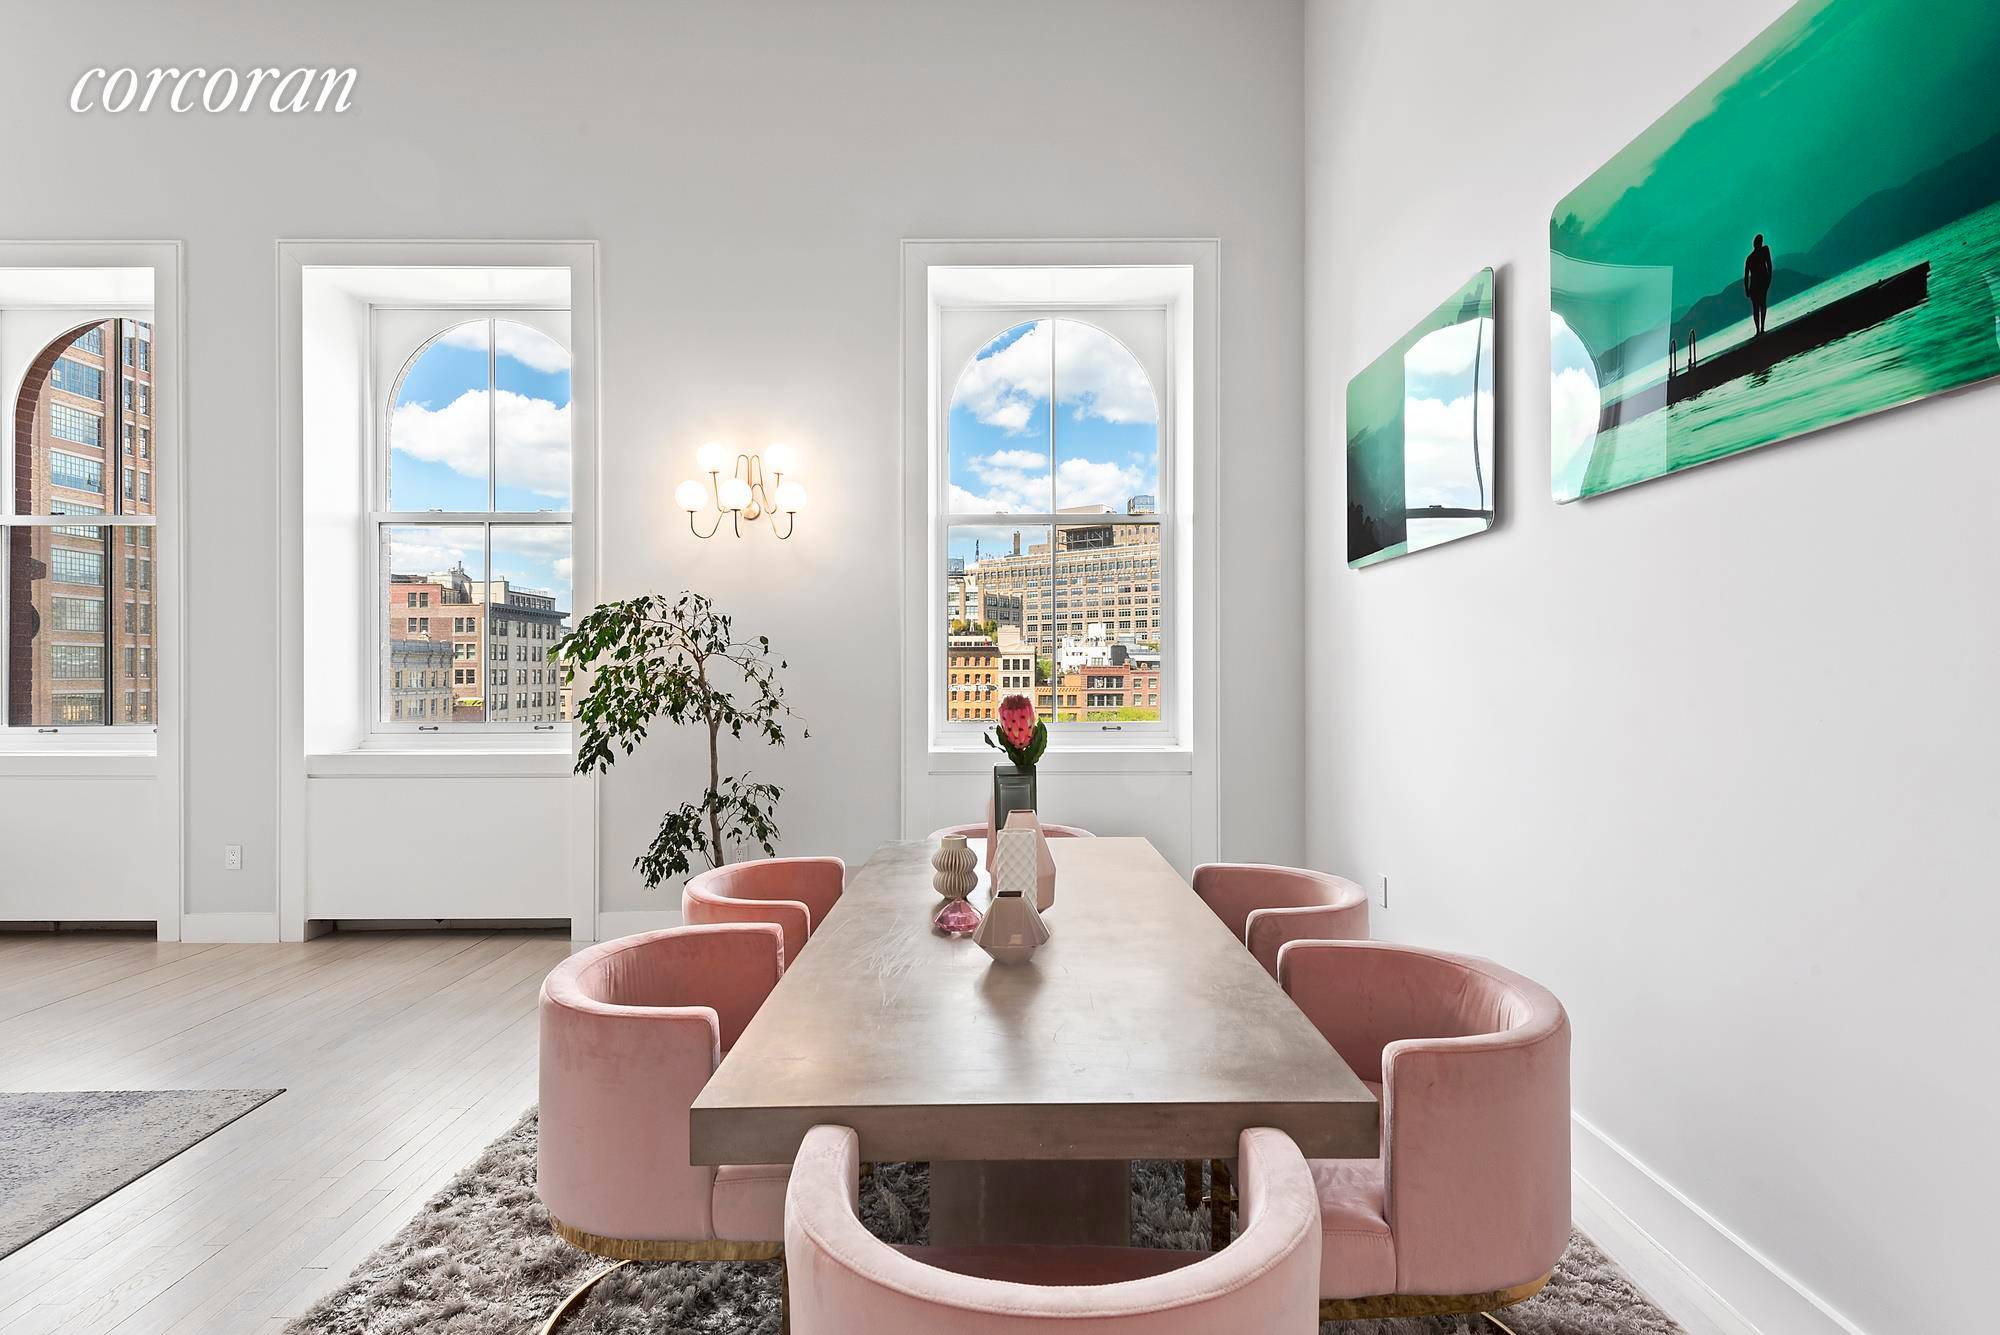 Impeccably renovated and beautifully positioned atop the famed Merchants House Condominium, this outstanding four bedroom, four bathroom triplex is a peerless, mint condition sanctuary in the heart of Tribeca.